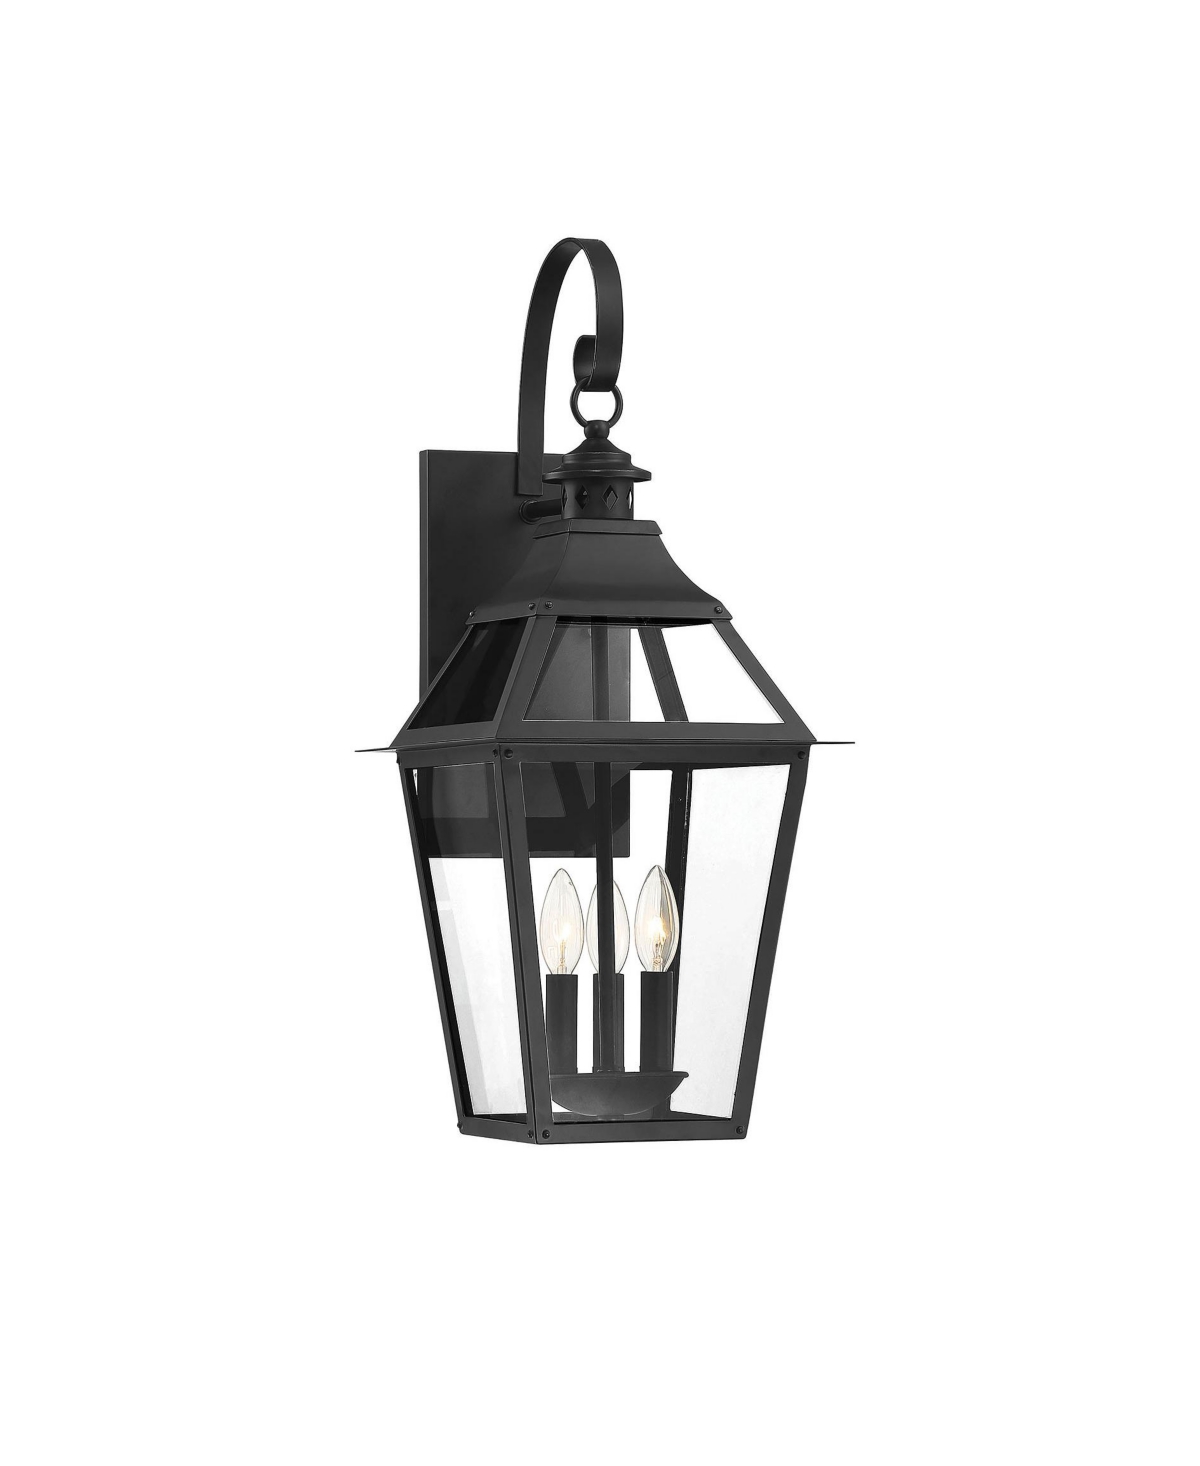 Jackson 3-Light Outdoor Wall Lantern in Matte Black with Gold Highlights - Black/gold highlighted